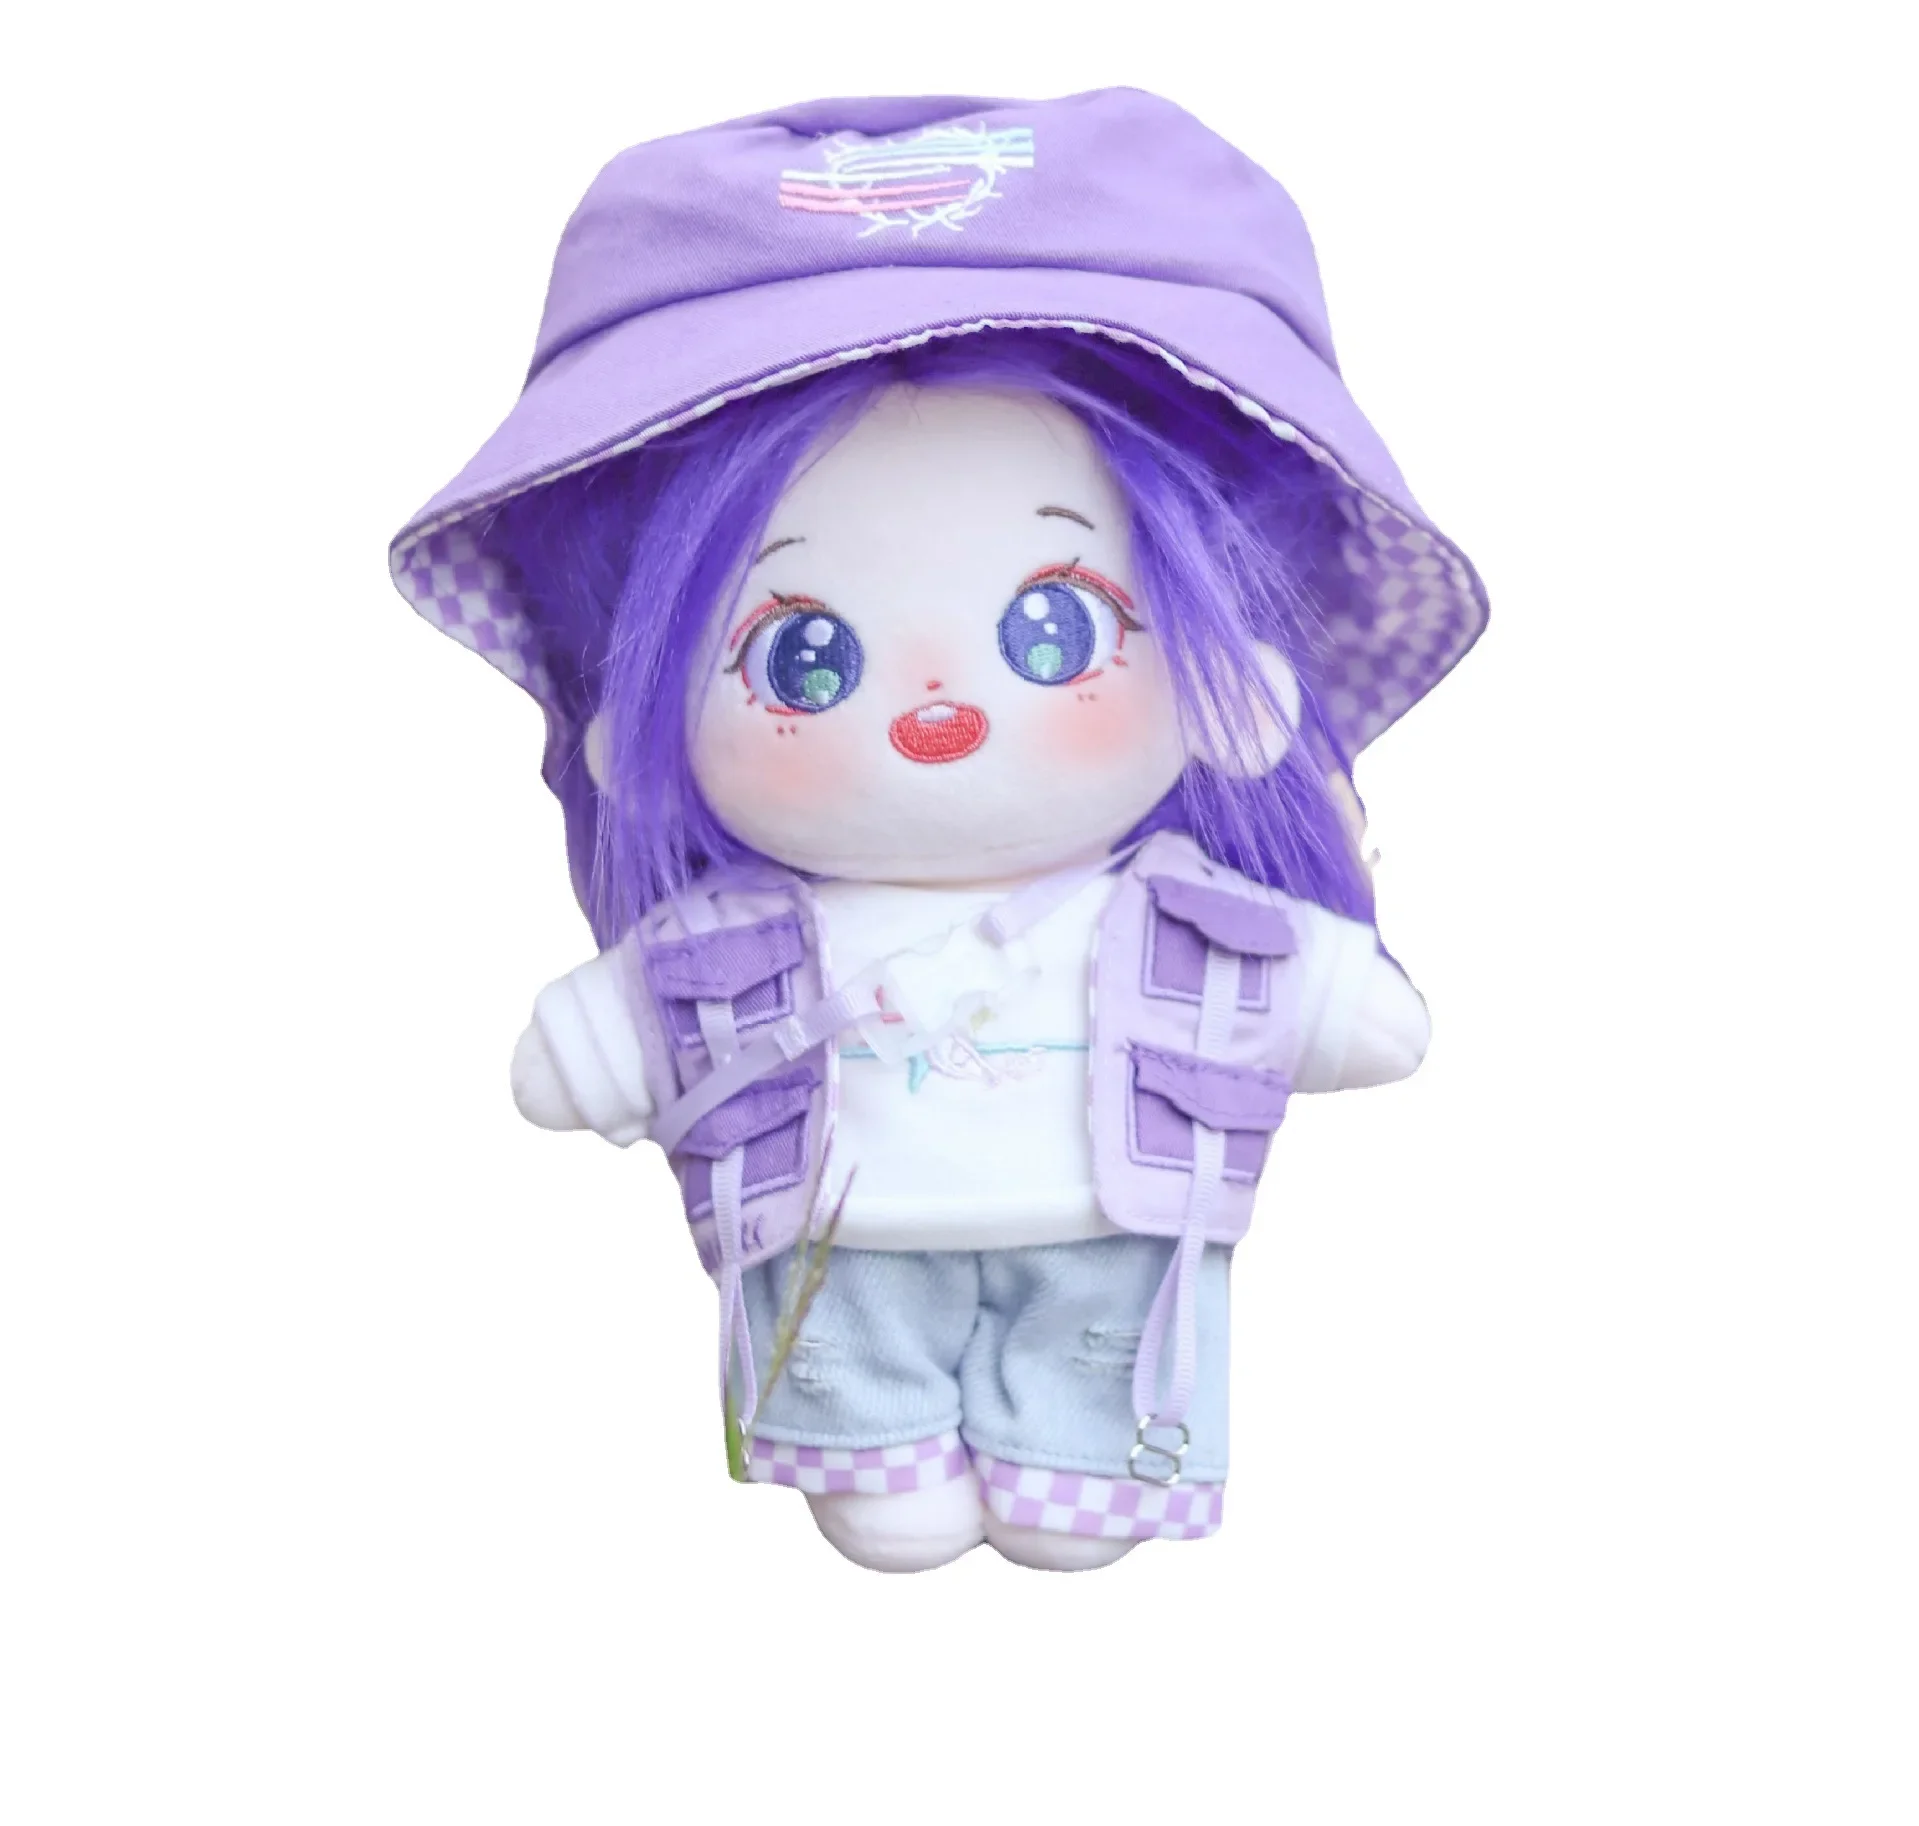 

Cute Face Kawaii 20cm EXO Kpop Plush Doll Baby Doll with Hair Plush Doll's Toy Dolls Accessories for Our Generation